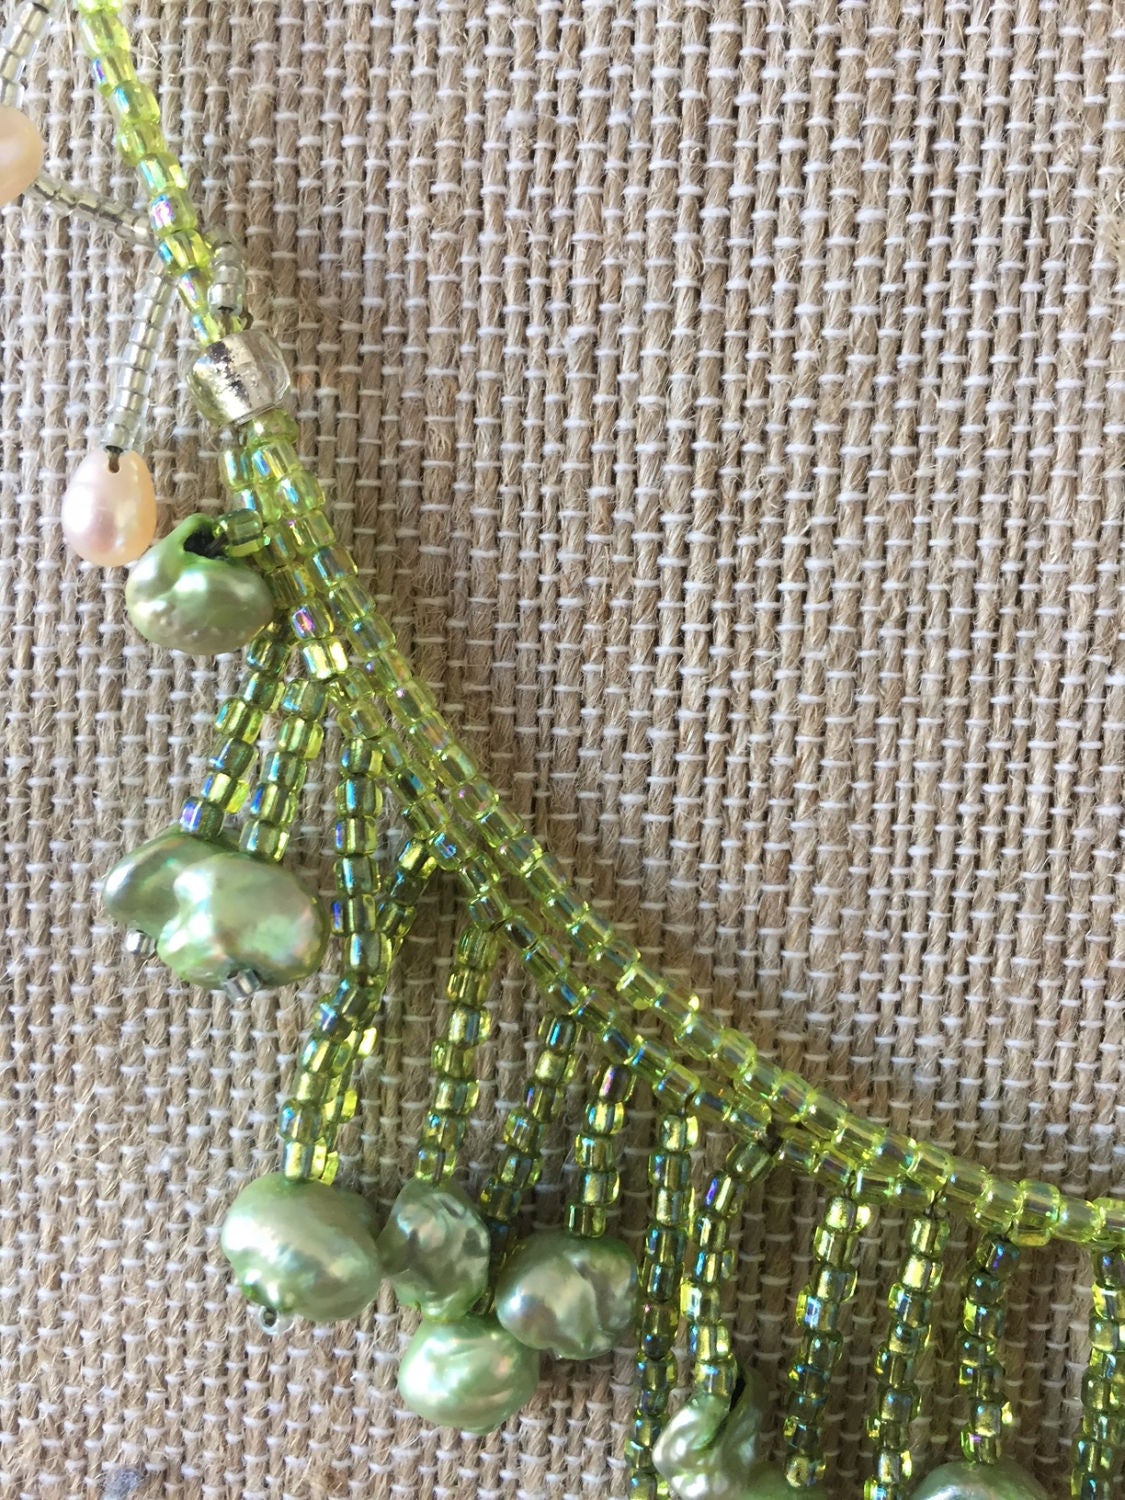 Hand woven pearl necklace. Beautiful flow with pearls and seed beads. Green and white pearls dangle on this necklace made by me in Maine.